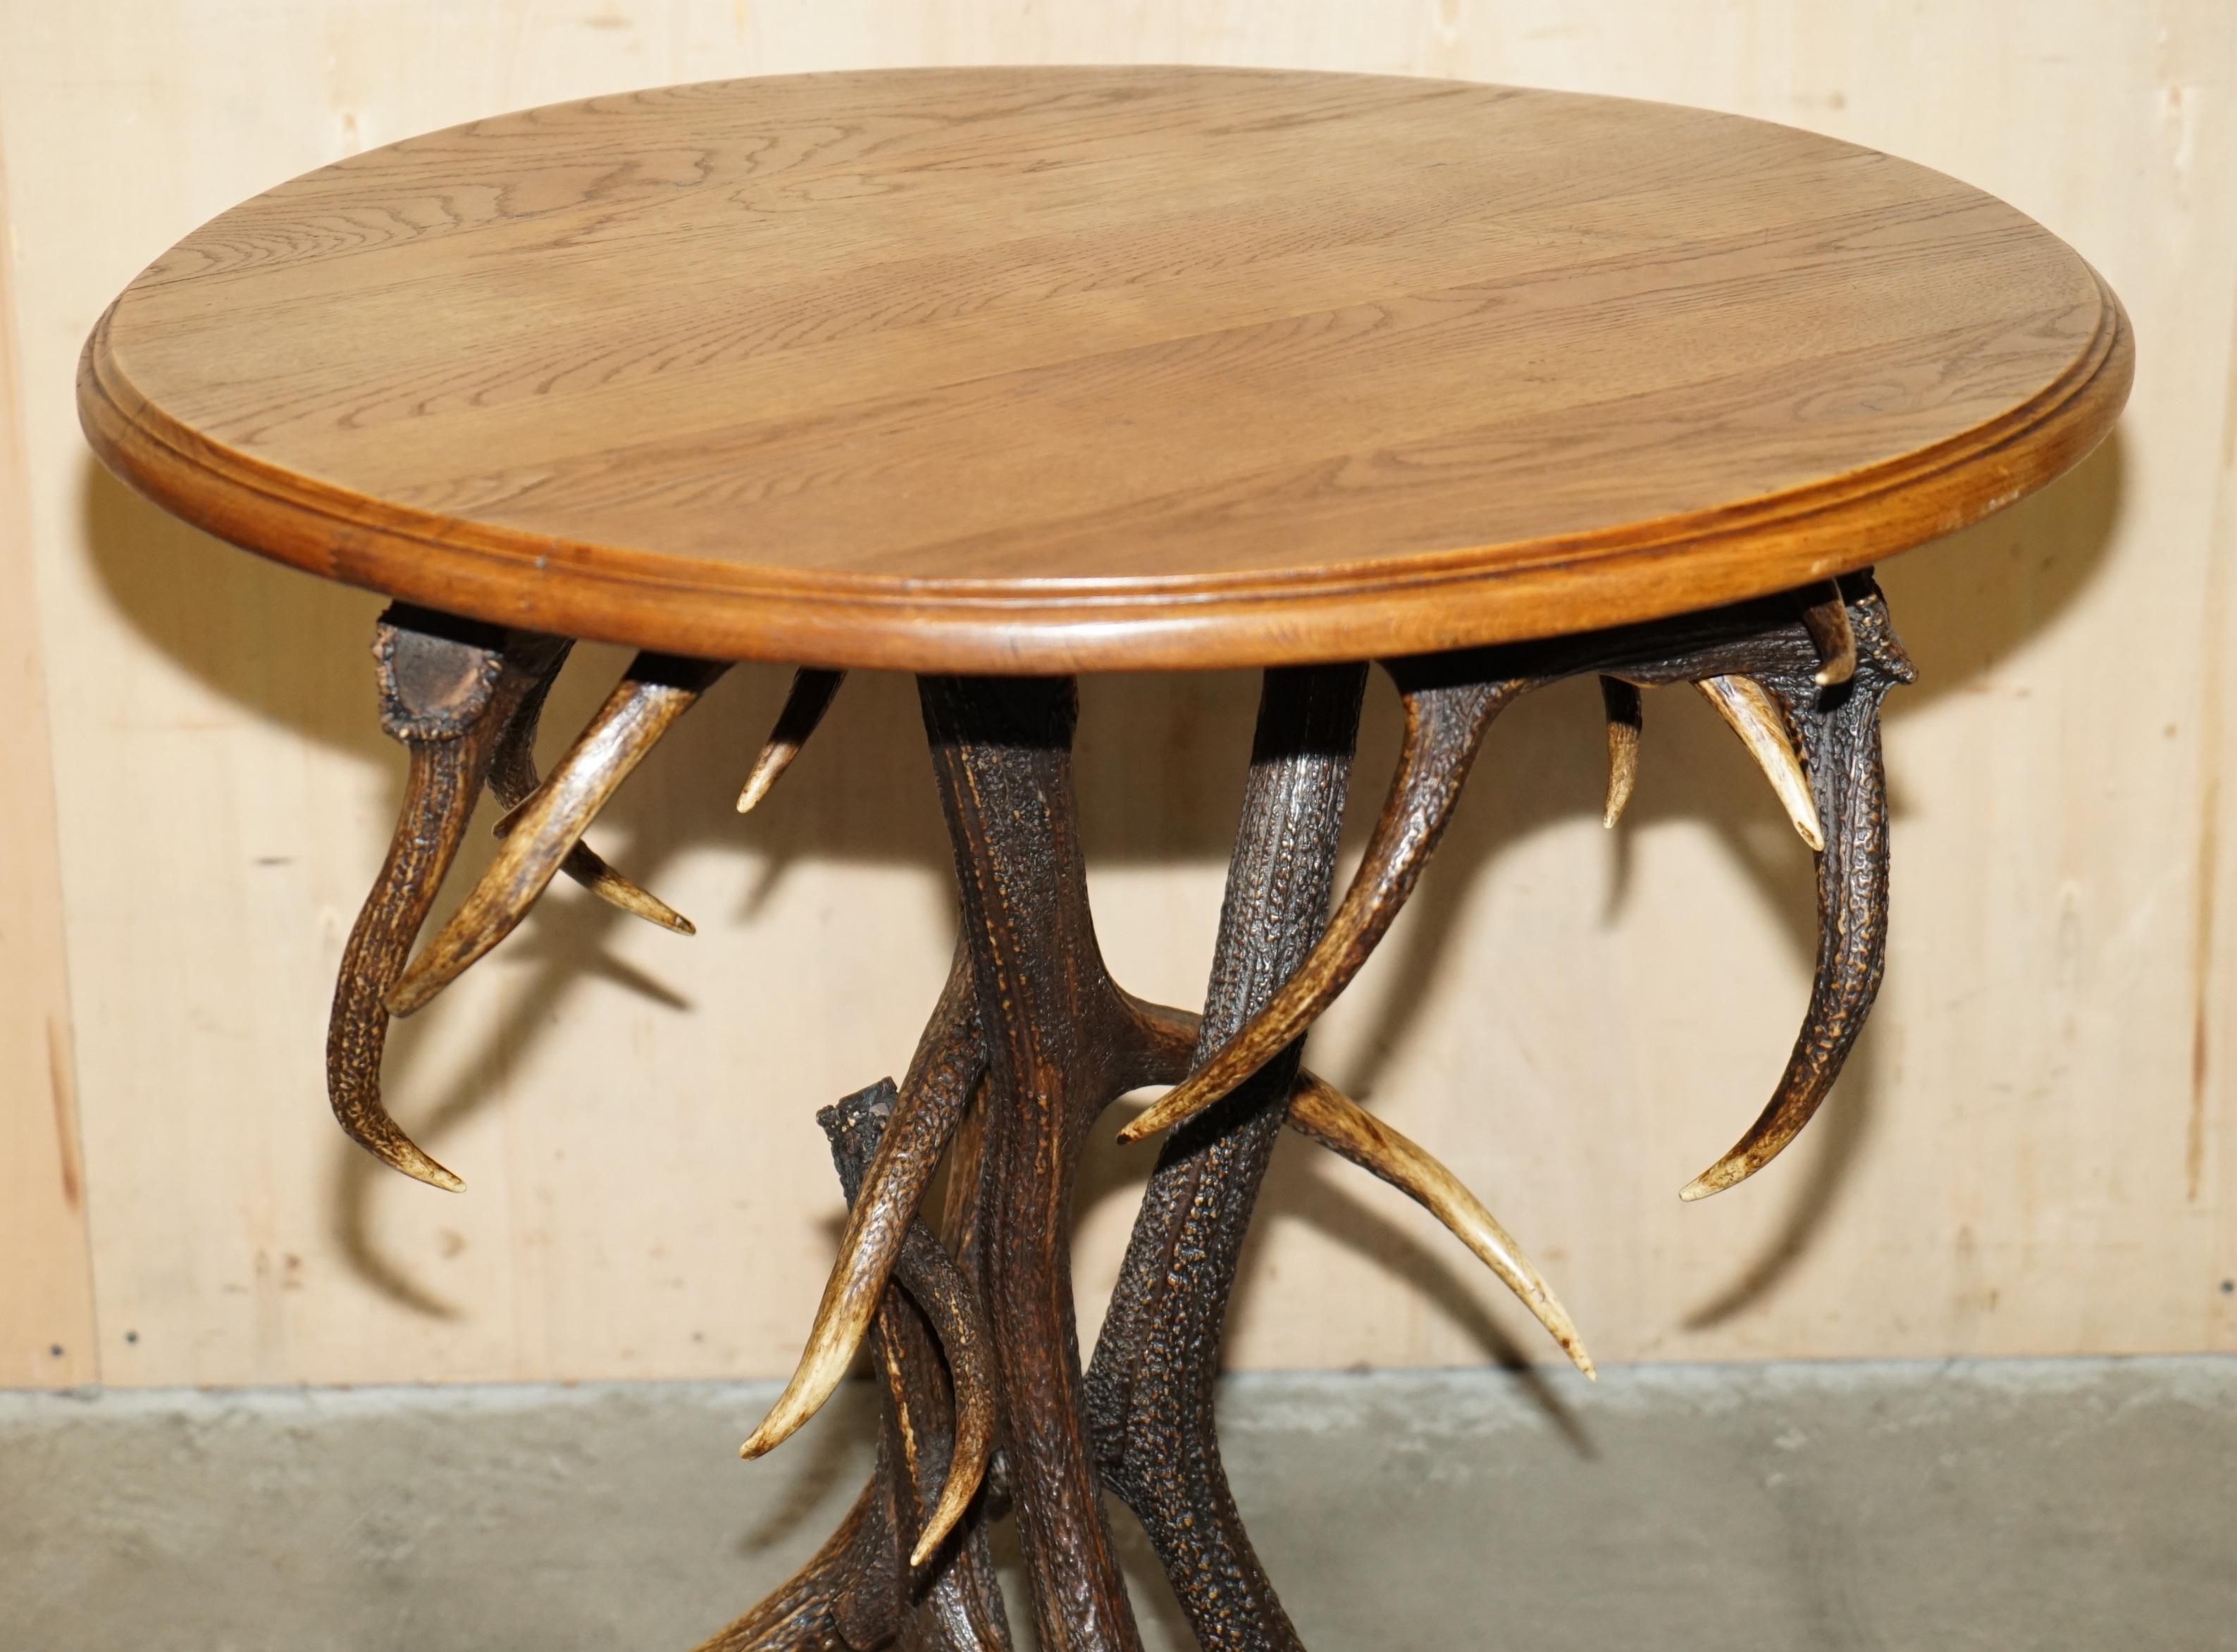 Royal House Antiques

Royal House Antiques is delighted to offer for sale this very rare original German late 19th century black forest antler supper cafe side table which is part of a suite 

Please note the delivery fee listed is just a guide, it